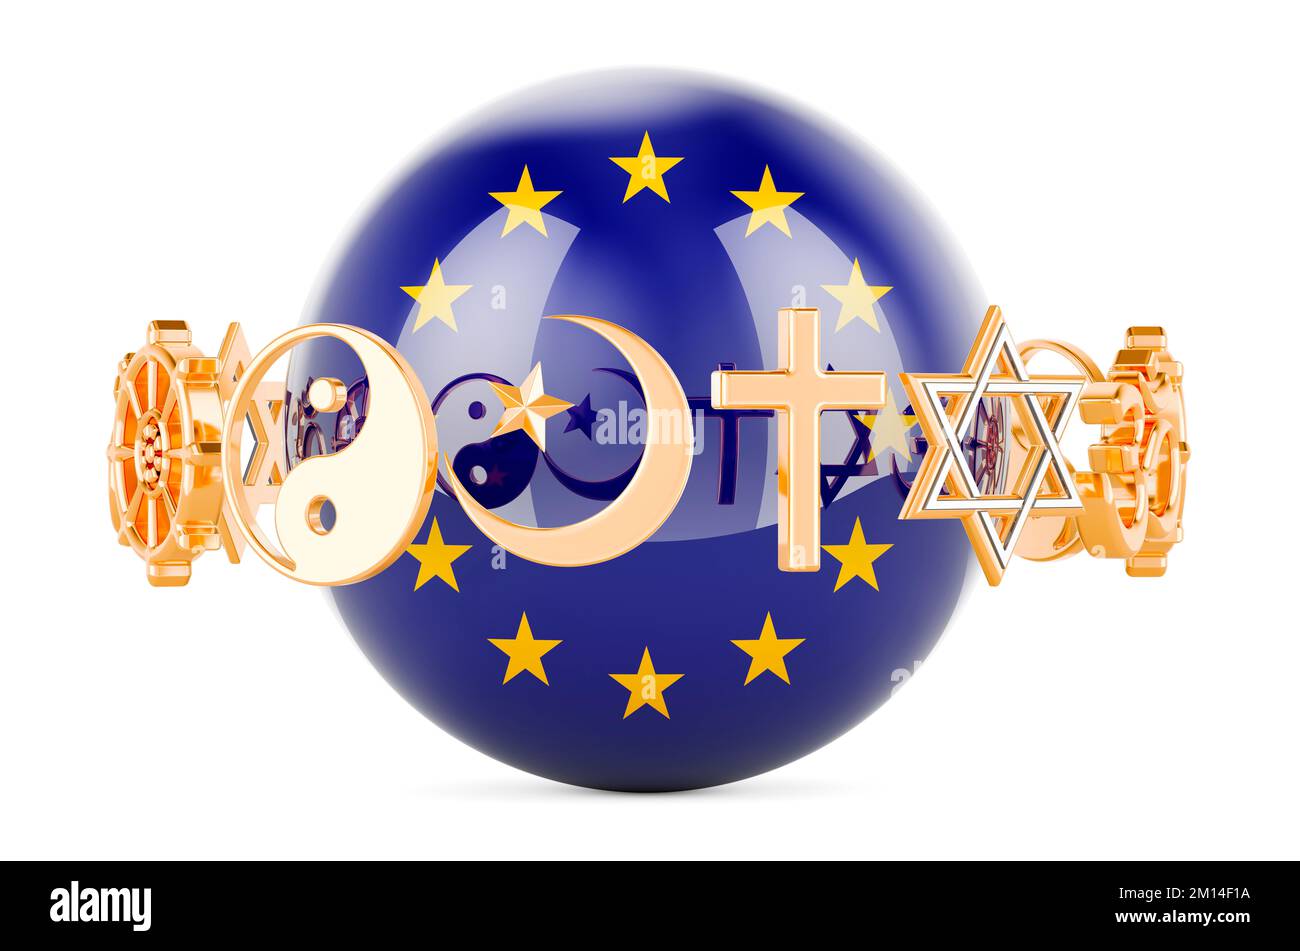 The EU flag painted on sphere with religions symbols around, 3D rendering isolated on white background Stock Photo